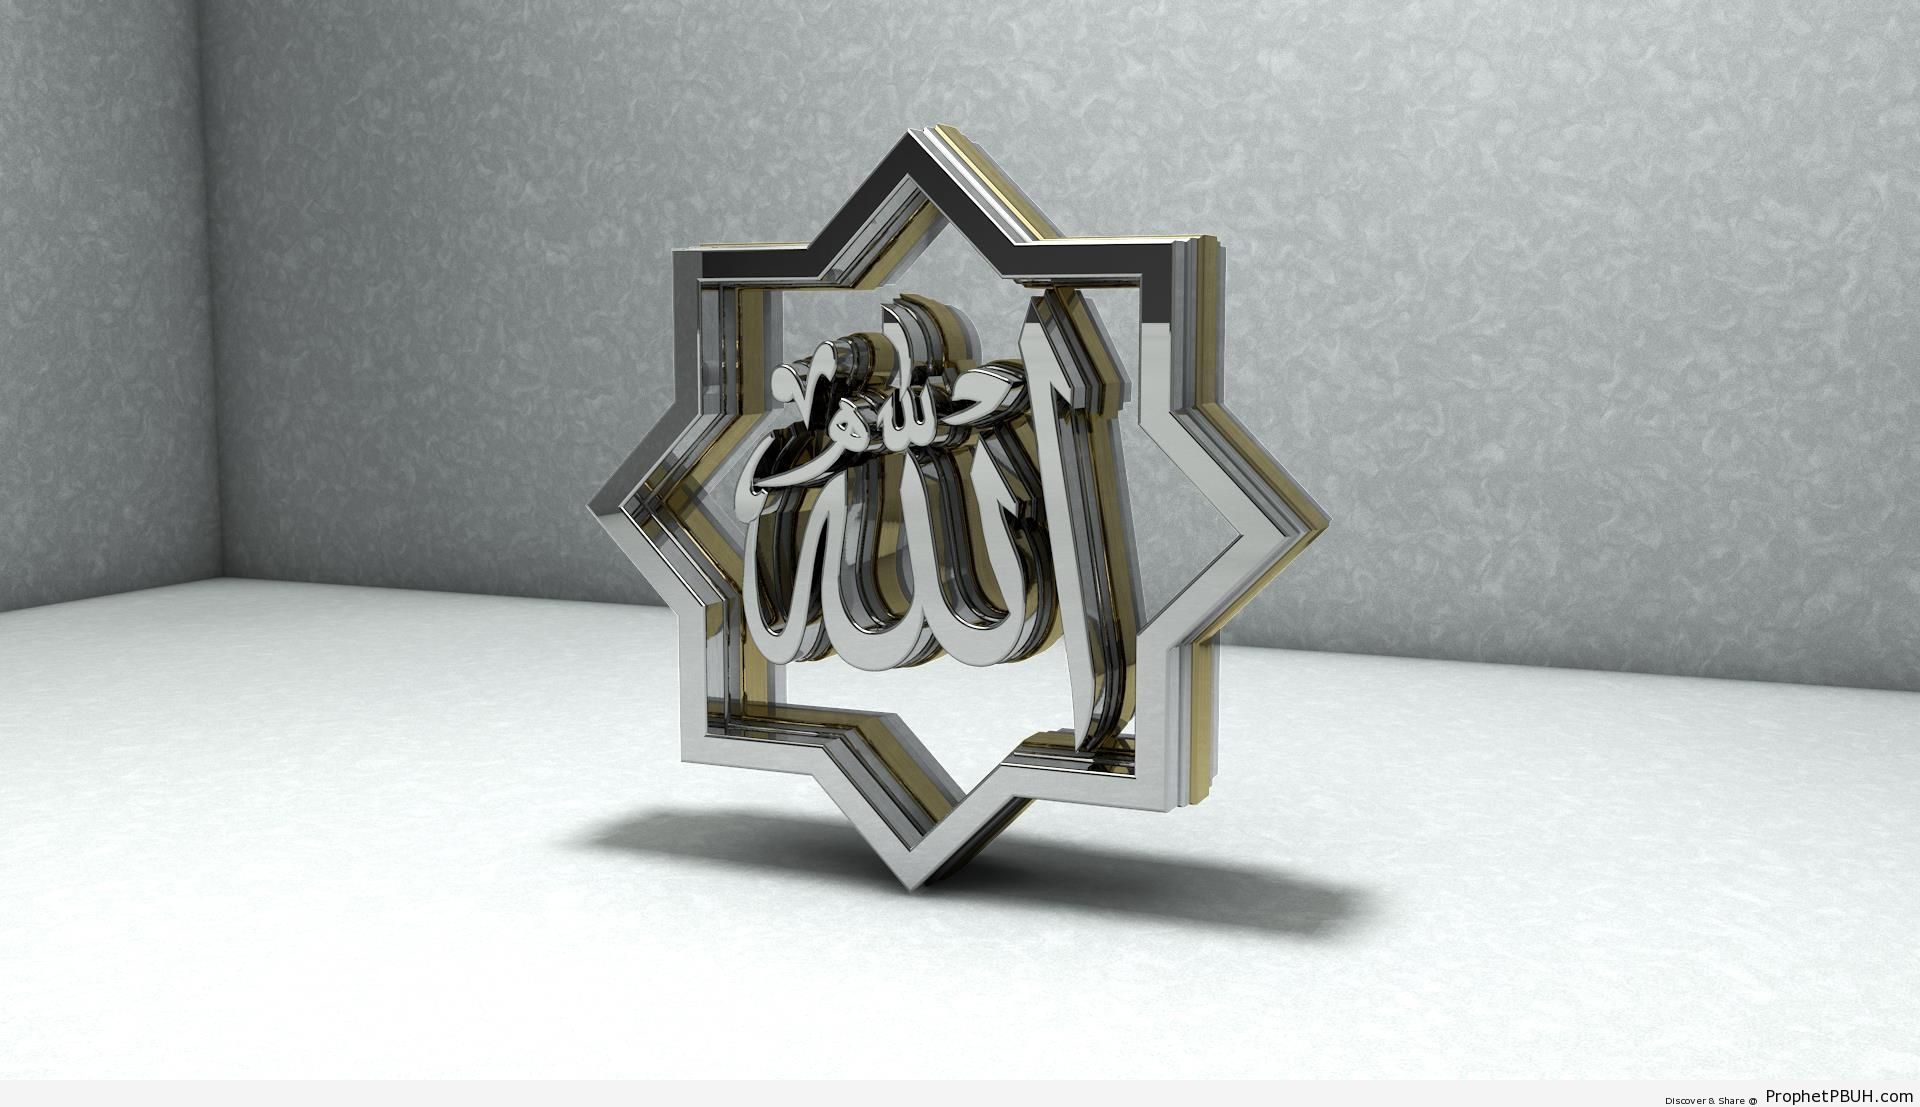 Allah Calligraphy in Eight Pointed Star (Digital 3D Calligraphy) - 3D Calligraphy and Typography 